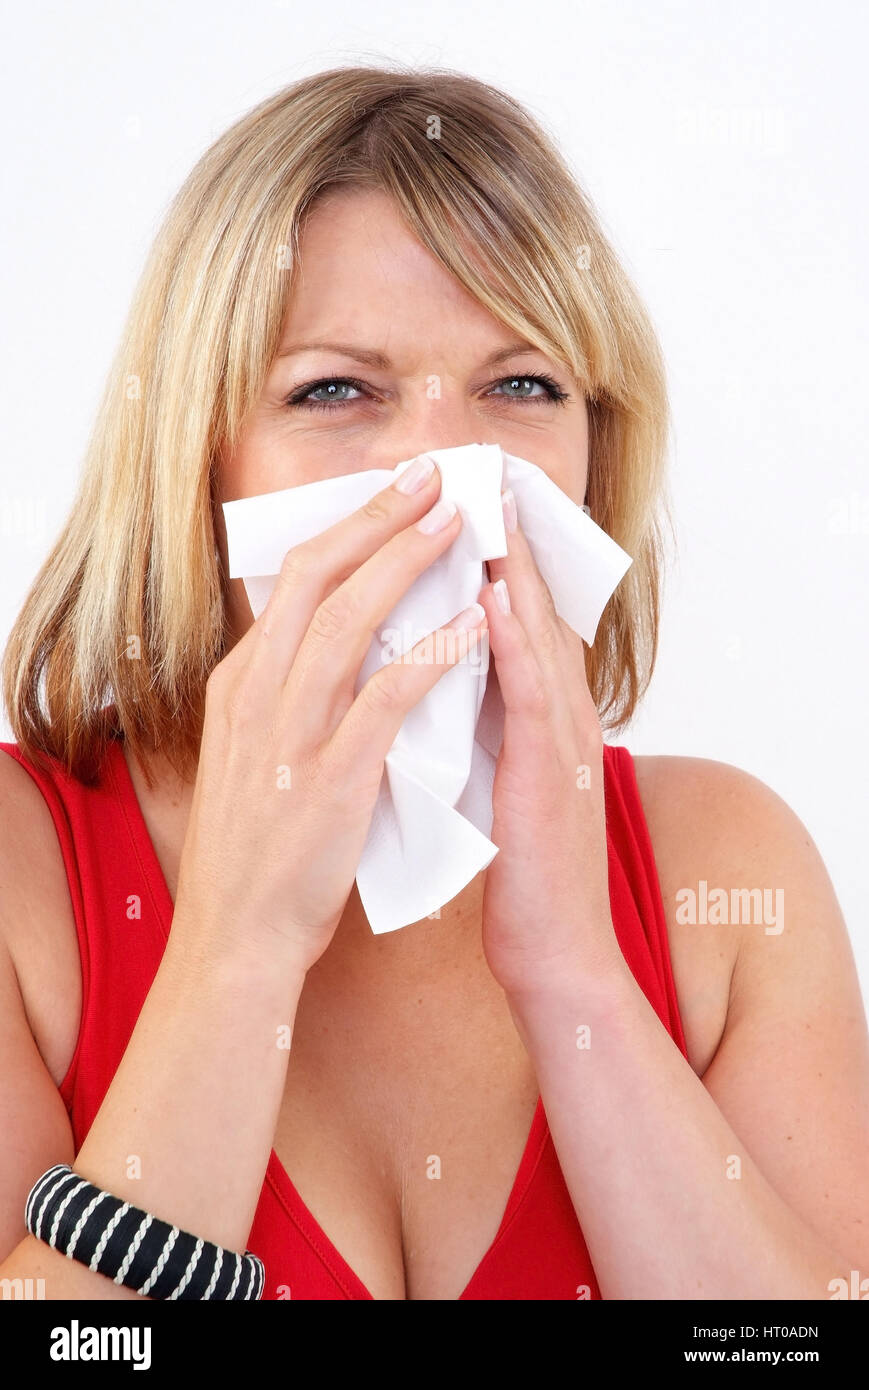 Frau schneuzt sich - woman blows her nose Stock Photo